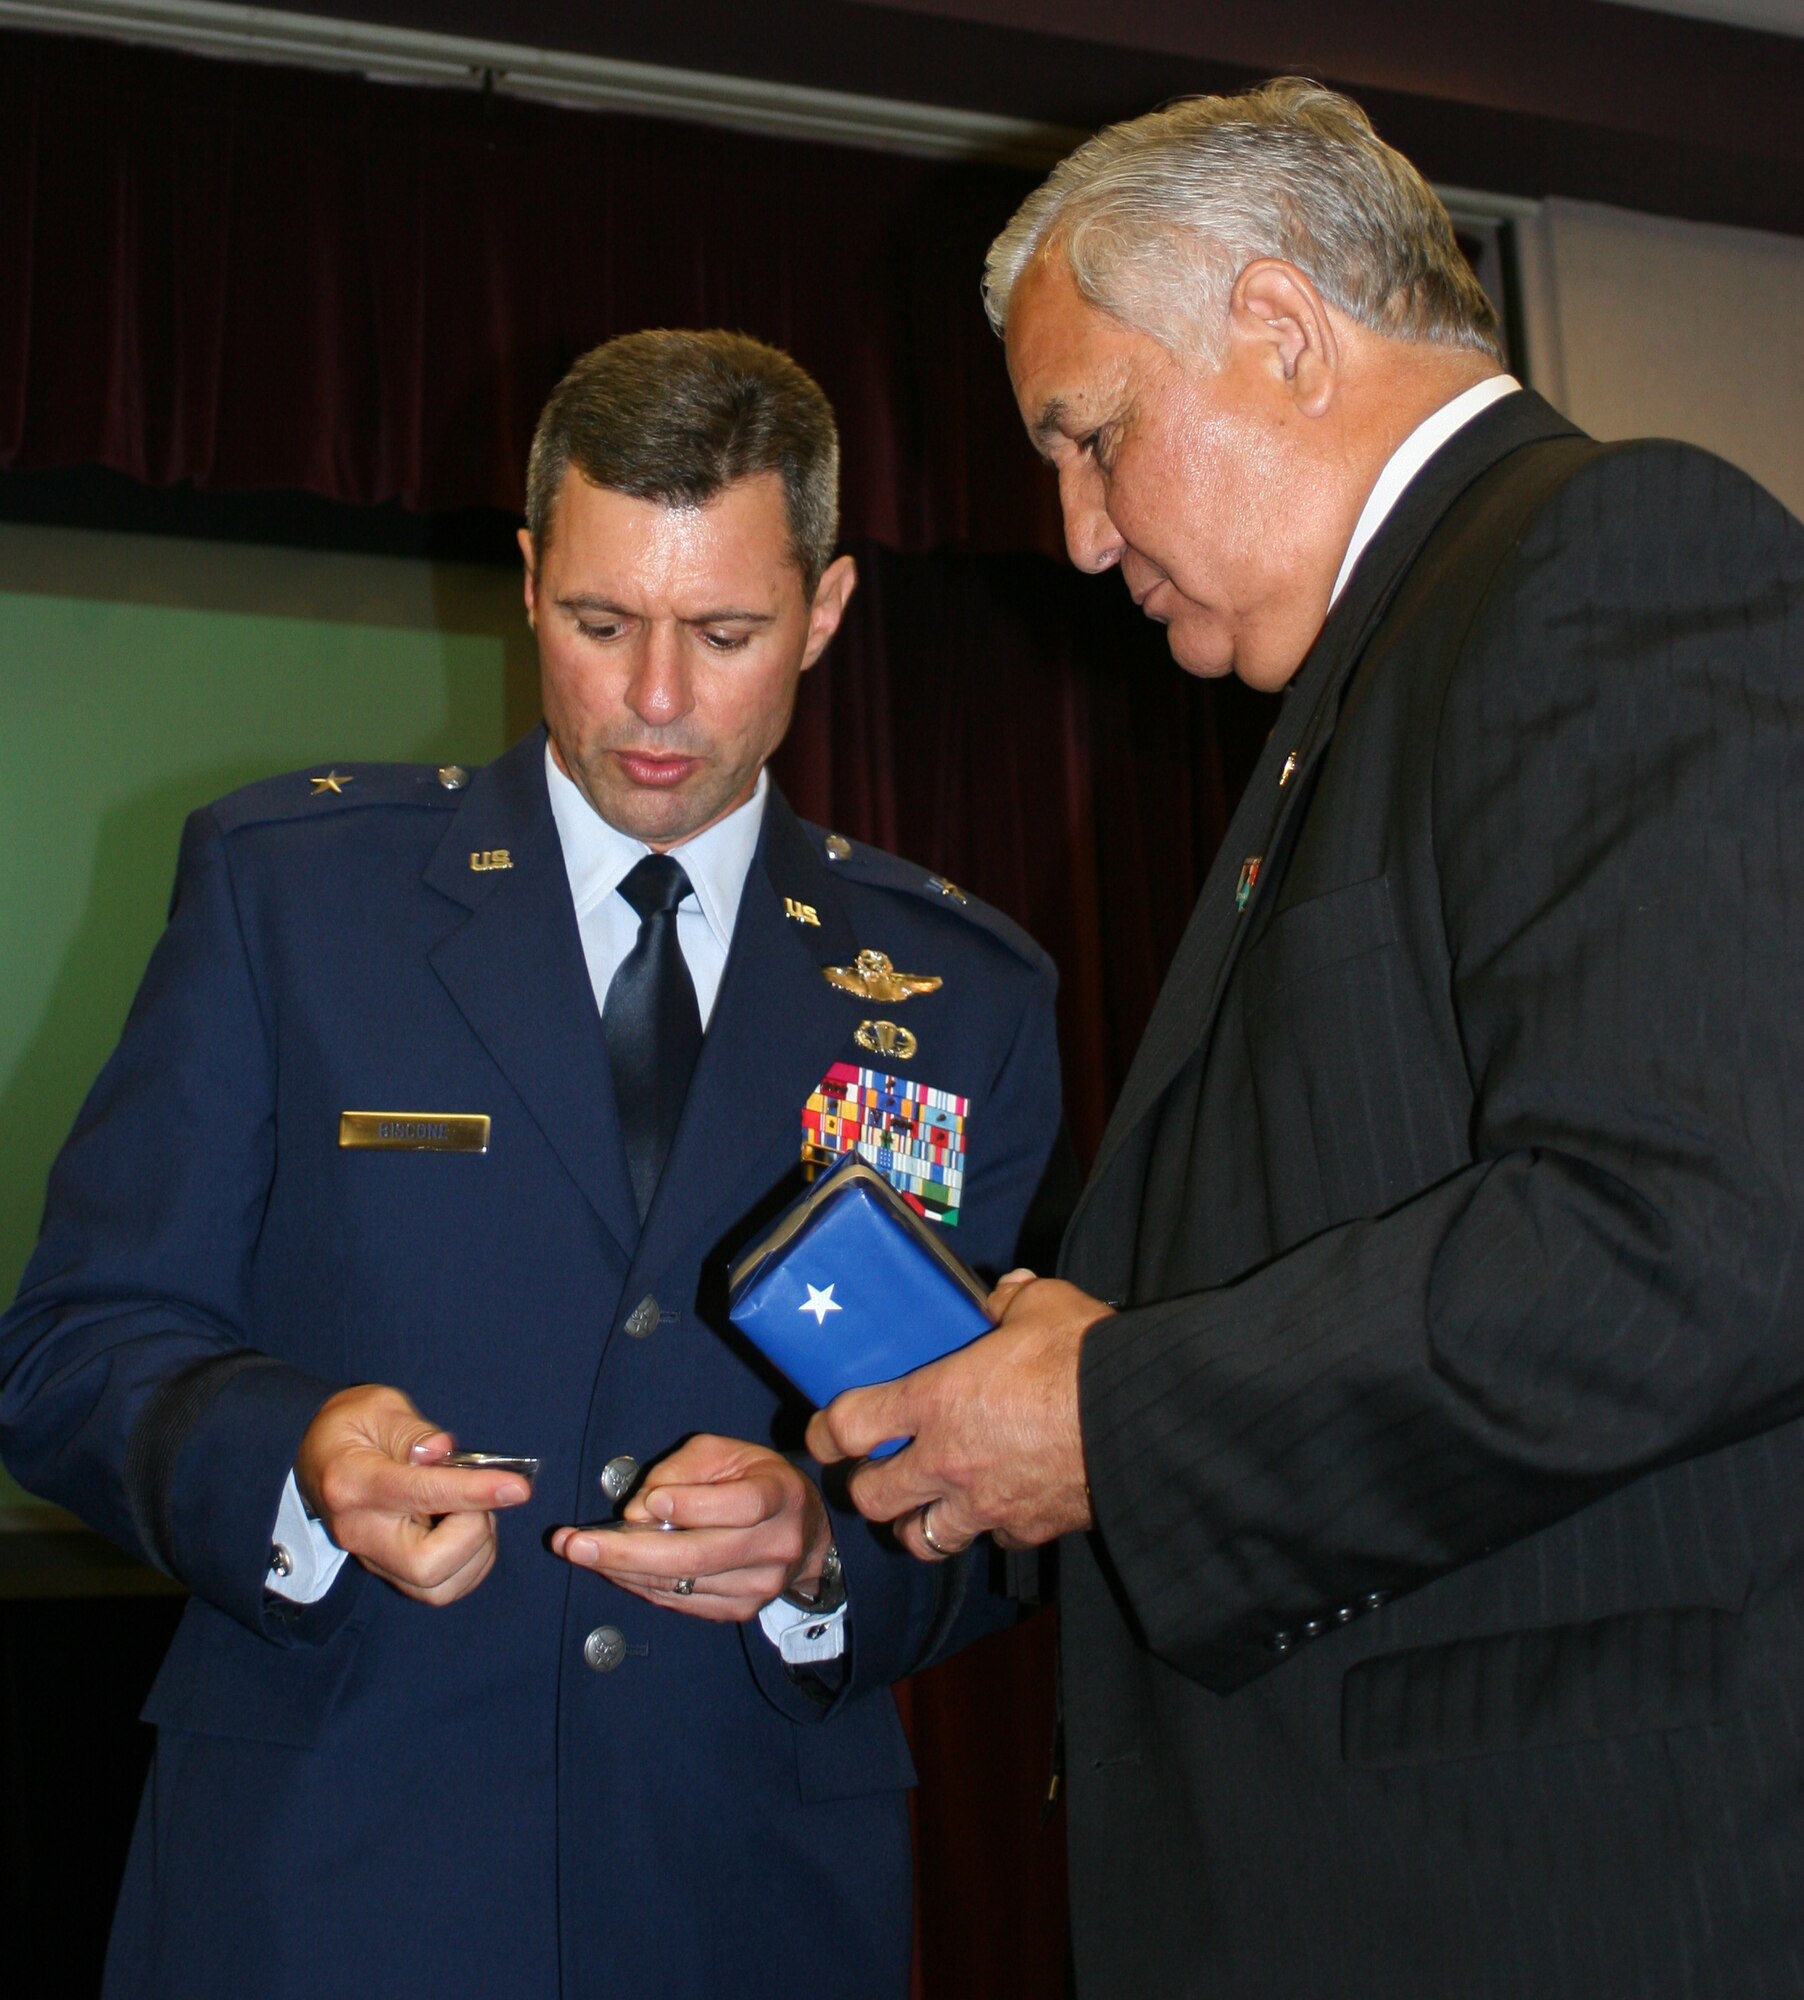 Brig. Gen. Greg Biscone, 509th Bomb Wing commander, presents a commander’s coin to Congressman Silvestre Reyes, who represents the 16th District of Texas in the U.S. House of Representatives, at the base community council luncheon at Mission’s End May 29. As a senior member of both the Armed Services and Select Intelligence Committees, Congressman Reyes is a key member of Congress on defense and military issues.  He attended the luncheon with Missouri Congressman Ike Skelton, and U.S. Navy Rear Admiral Mark Ferguson, Navy legislative affairs chief. Congressman Reyes, who served in the U.S. Army and is a Vietnam War veteran, thanked Whiteman members for their service and patriotism. (U.S. Air Force photo/Staff Sgt. Rob Hazelett)